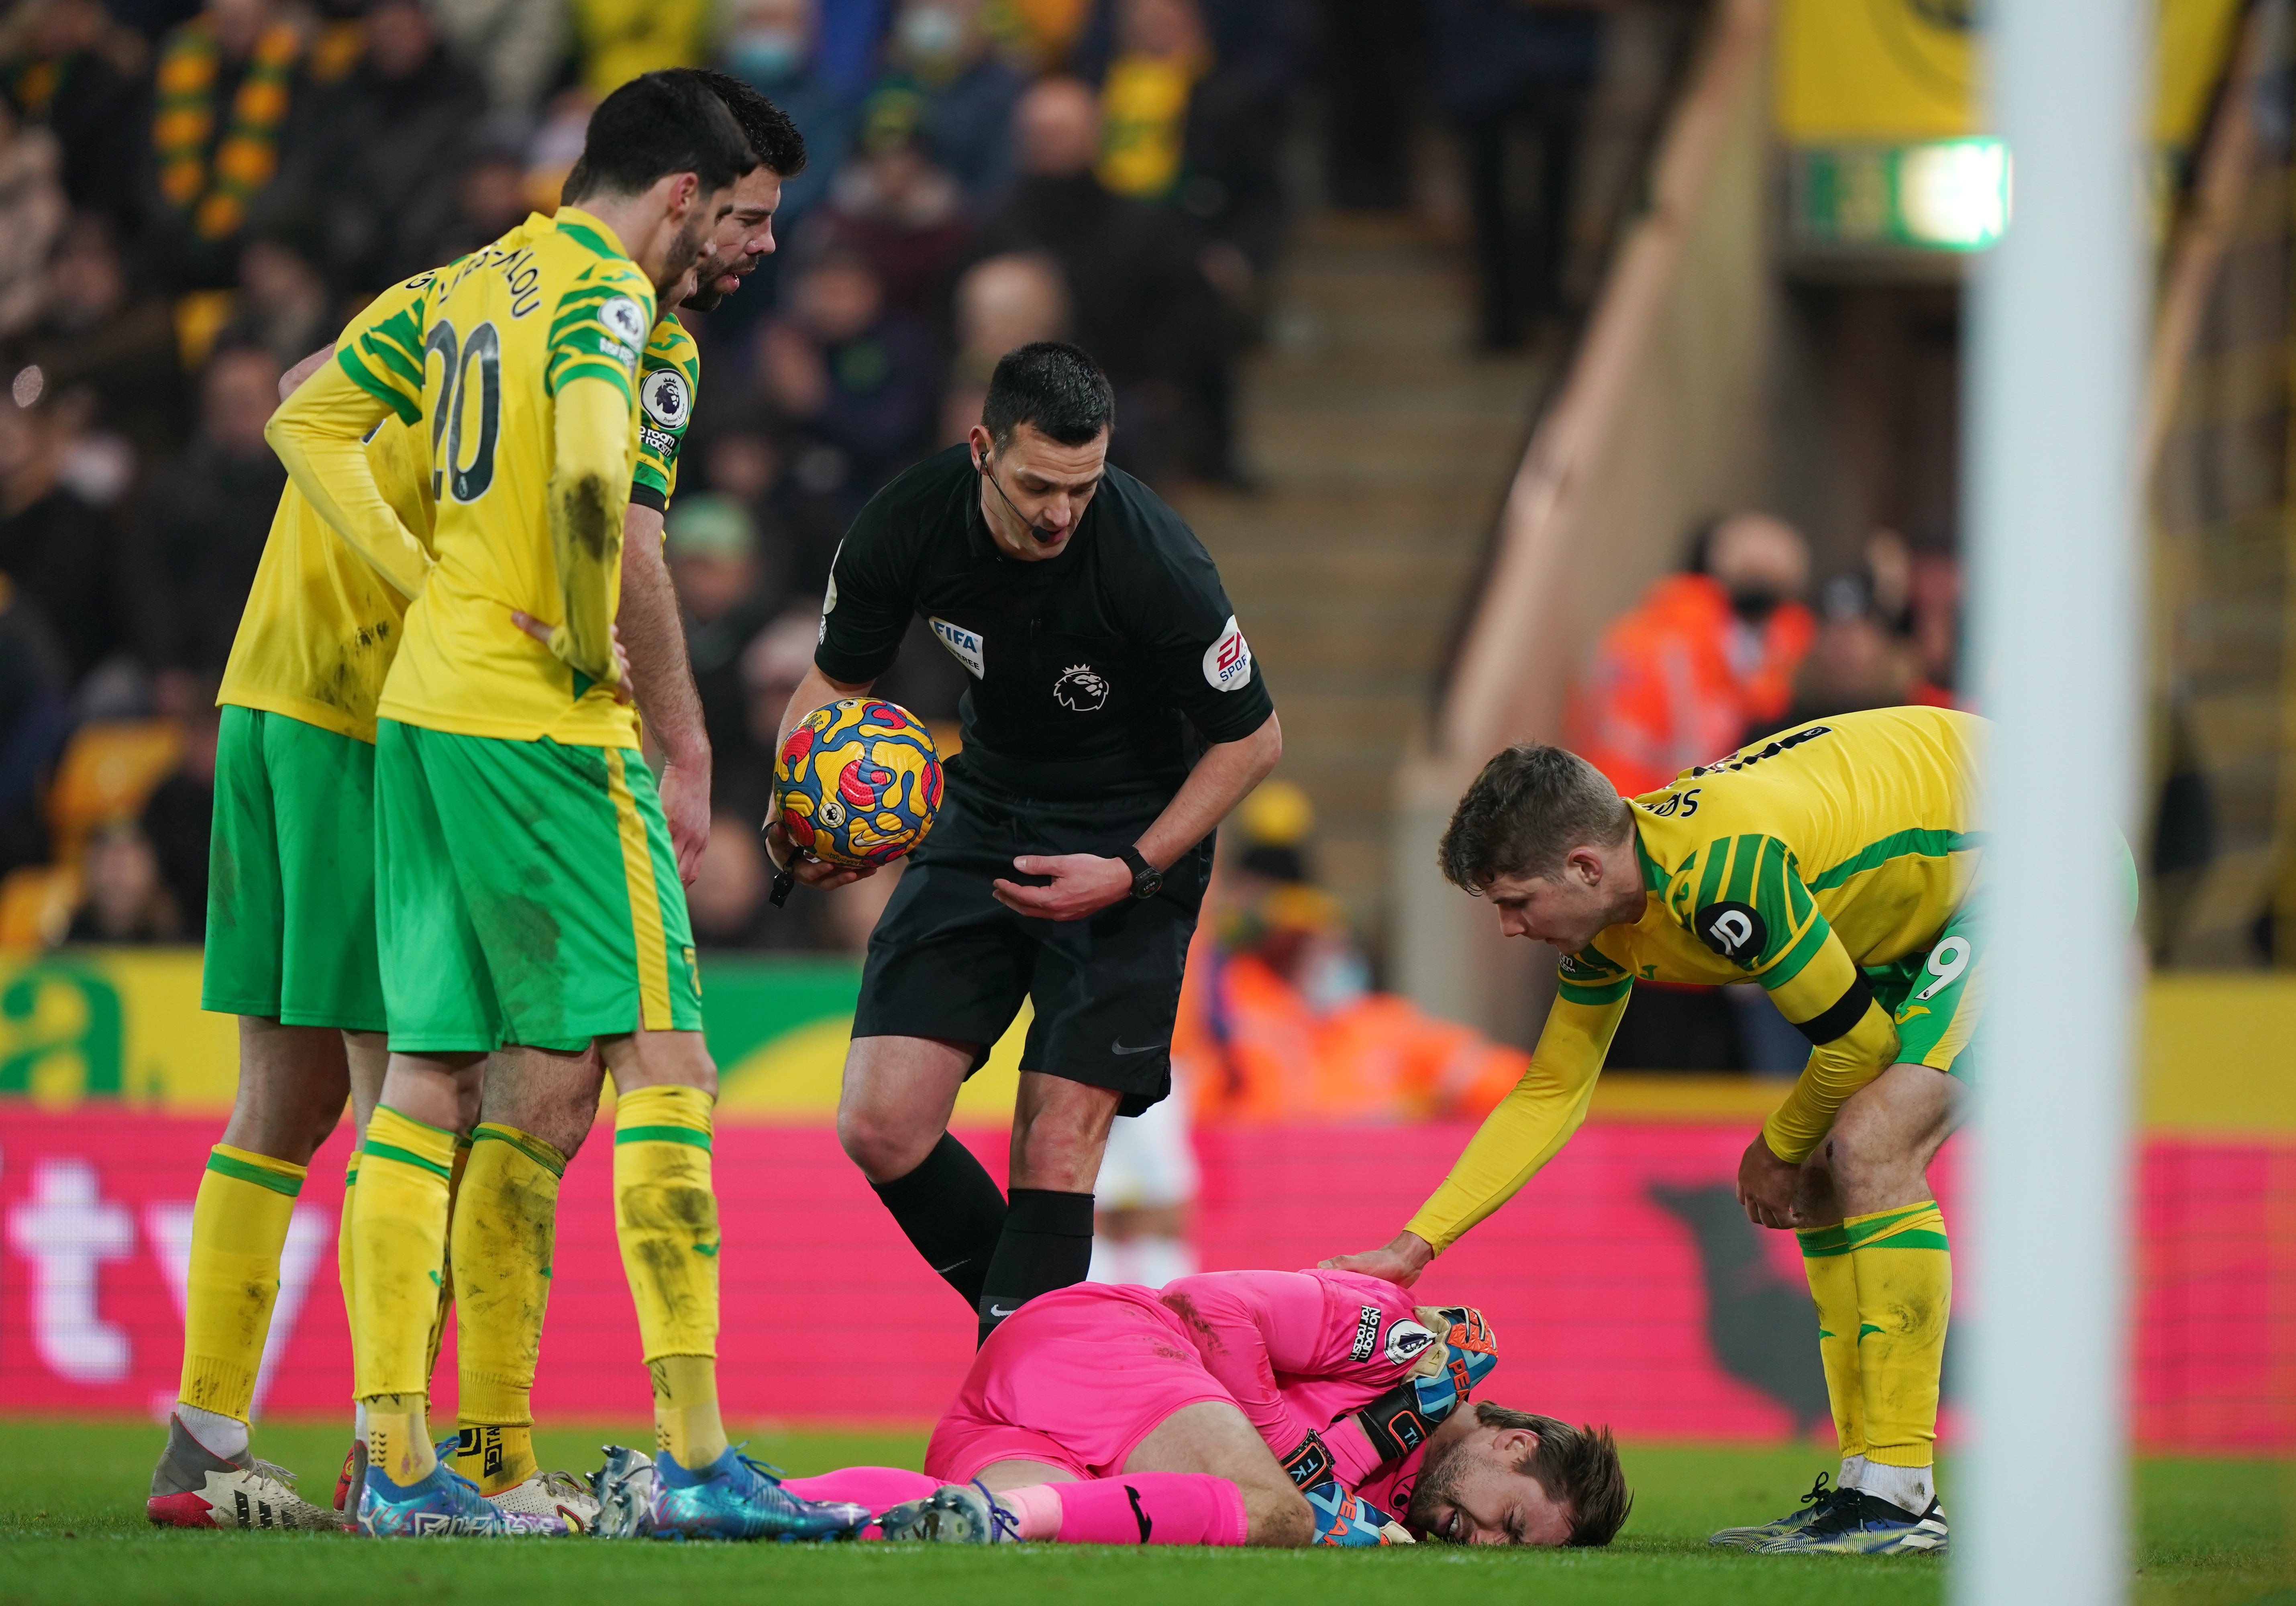 leninismen Glat Madison Norwich goalkeeper Tim Krul facing spell on sidelines with shoulder injury  | The Independent